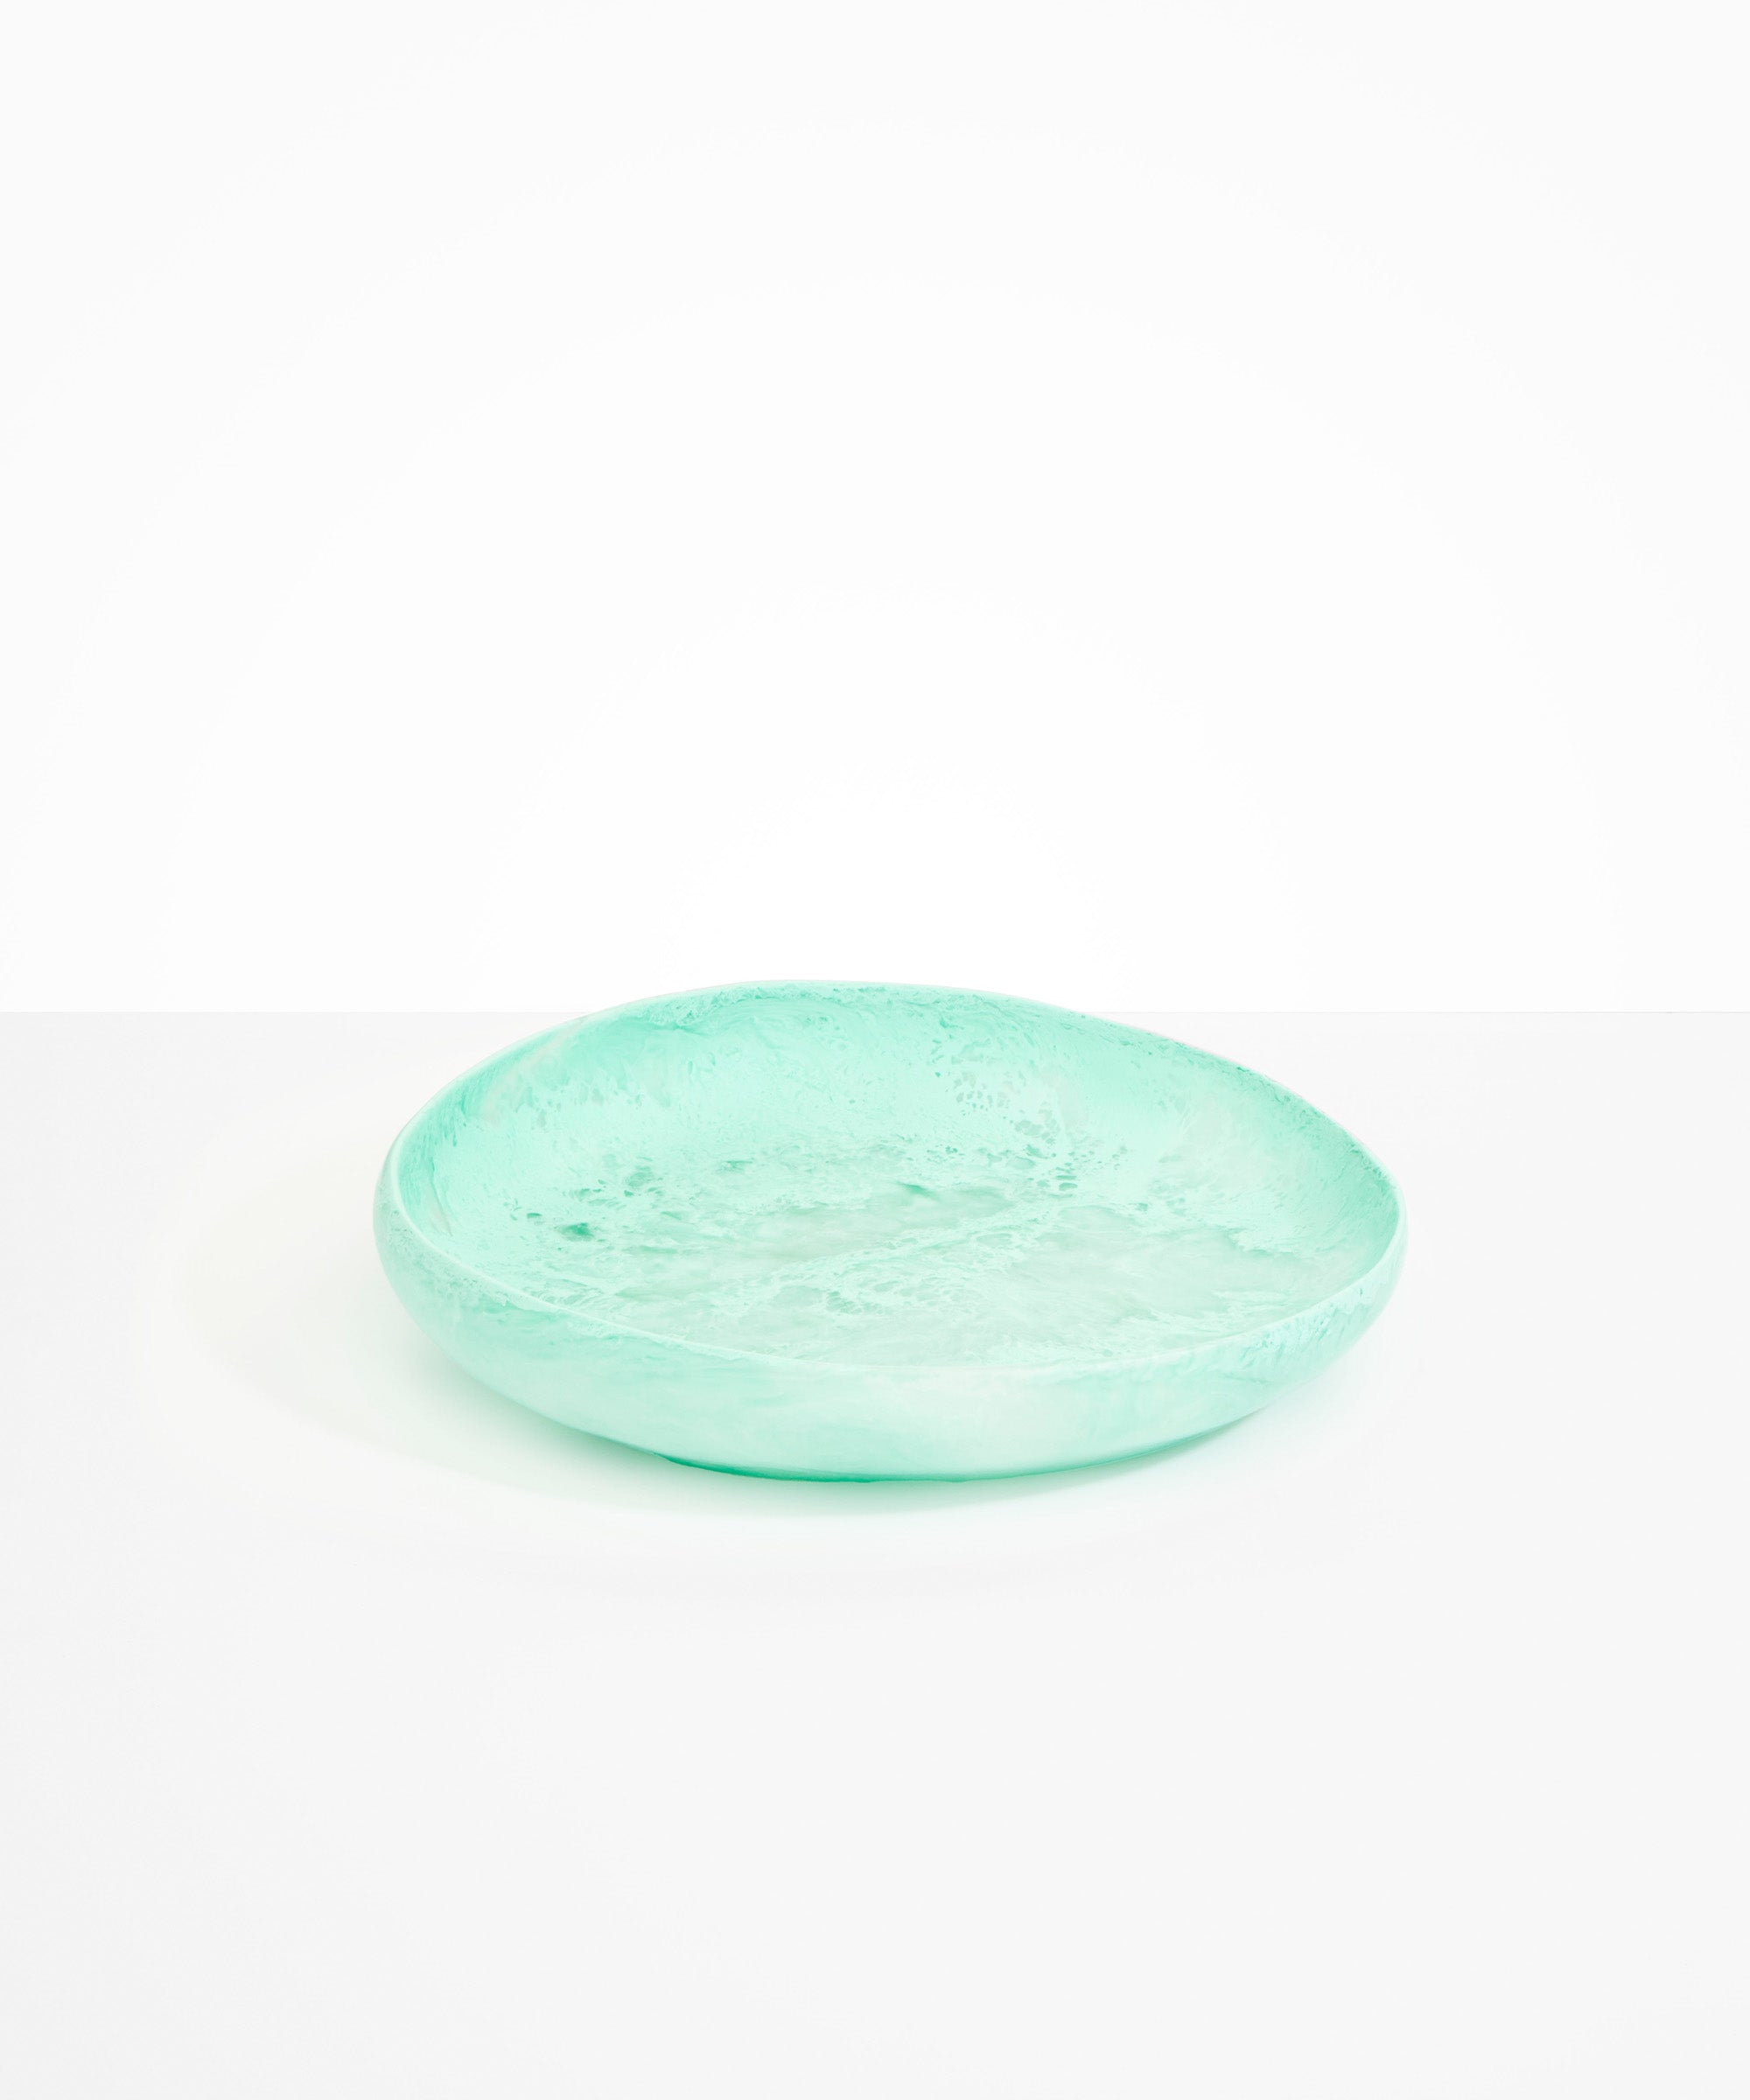 Dinosaur Designs Large Earth Bowl Bowls in Mint color resin